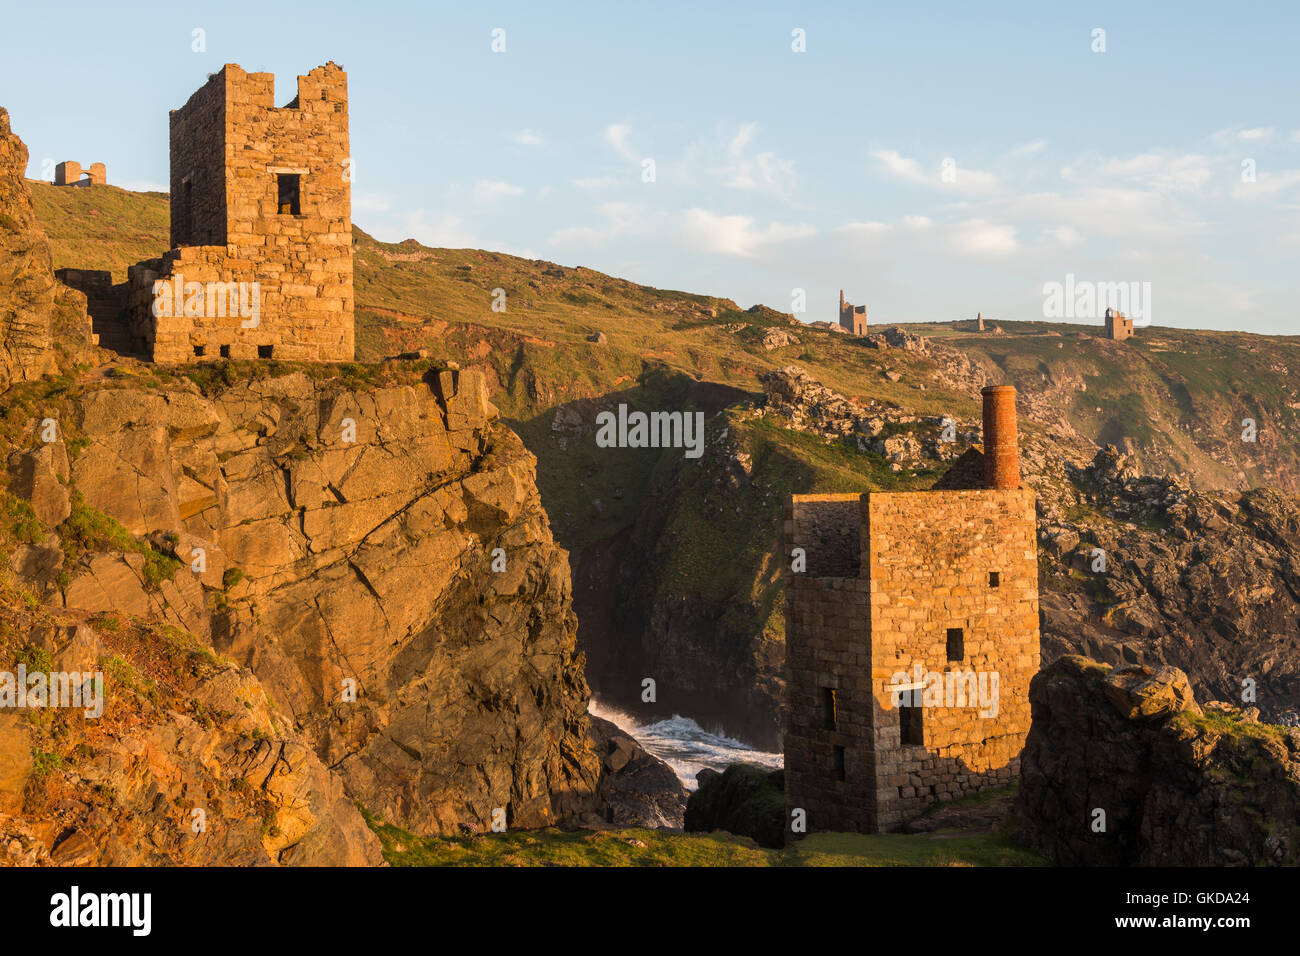 The Crowns engine houses at Botallack, Cornwall. Stock Photo